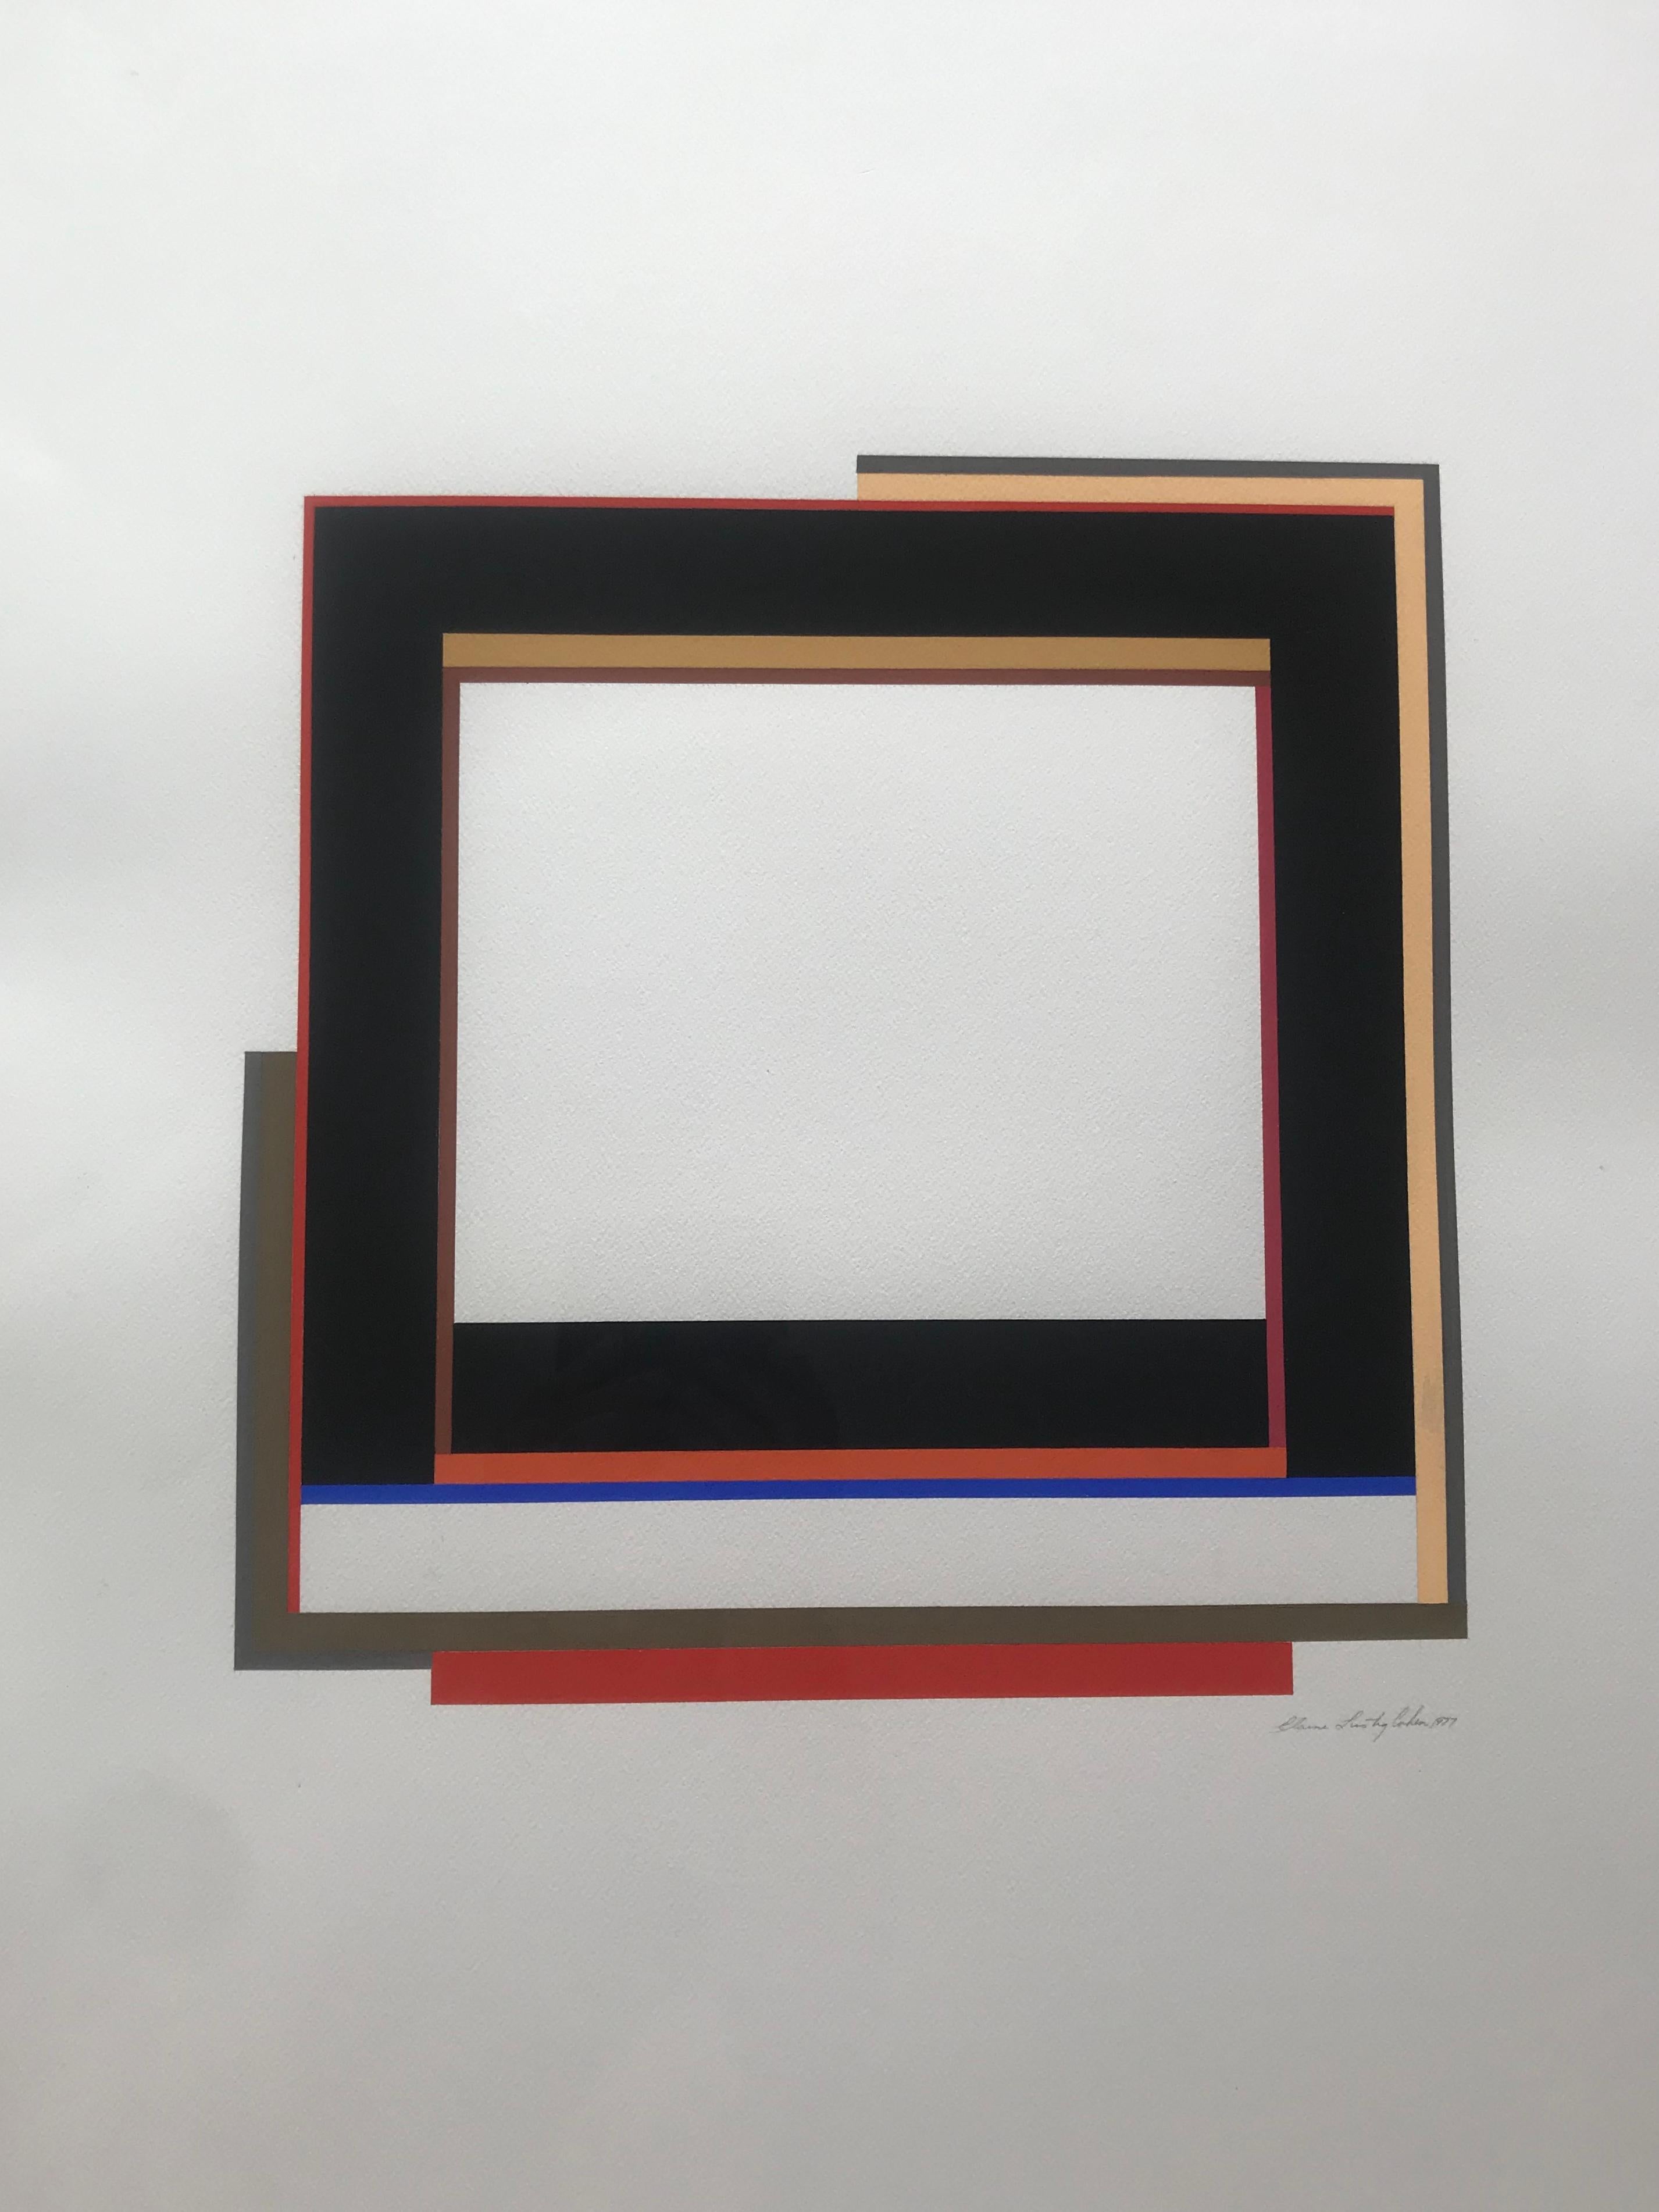 1927 - 2016
Elaine Lustig Cohen was an artist / graphic designer.
She was a modernist at heart, like her ex husband graphic designer Alvin Lustig.
She was influenced by modern architecture and graphic design.  
These two paintings explore those